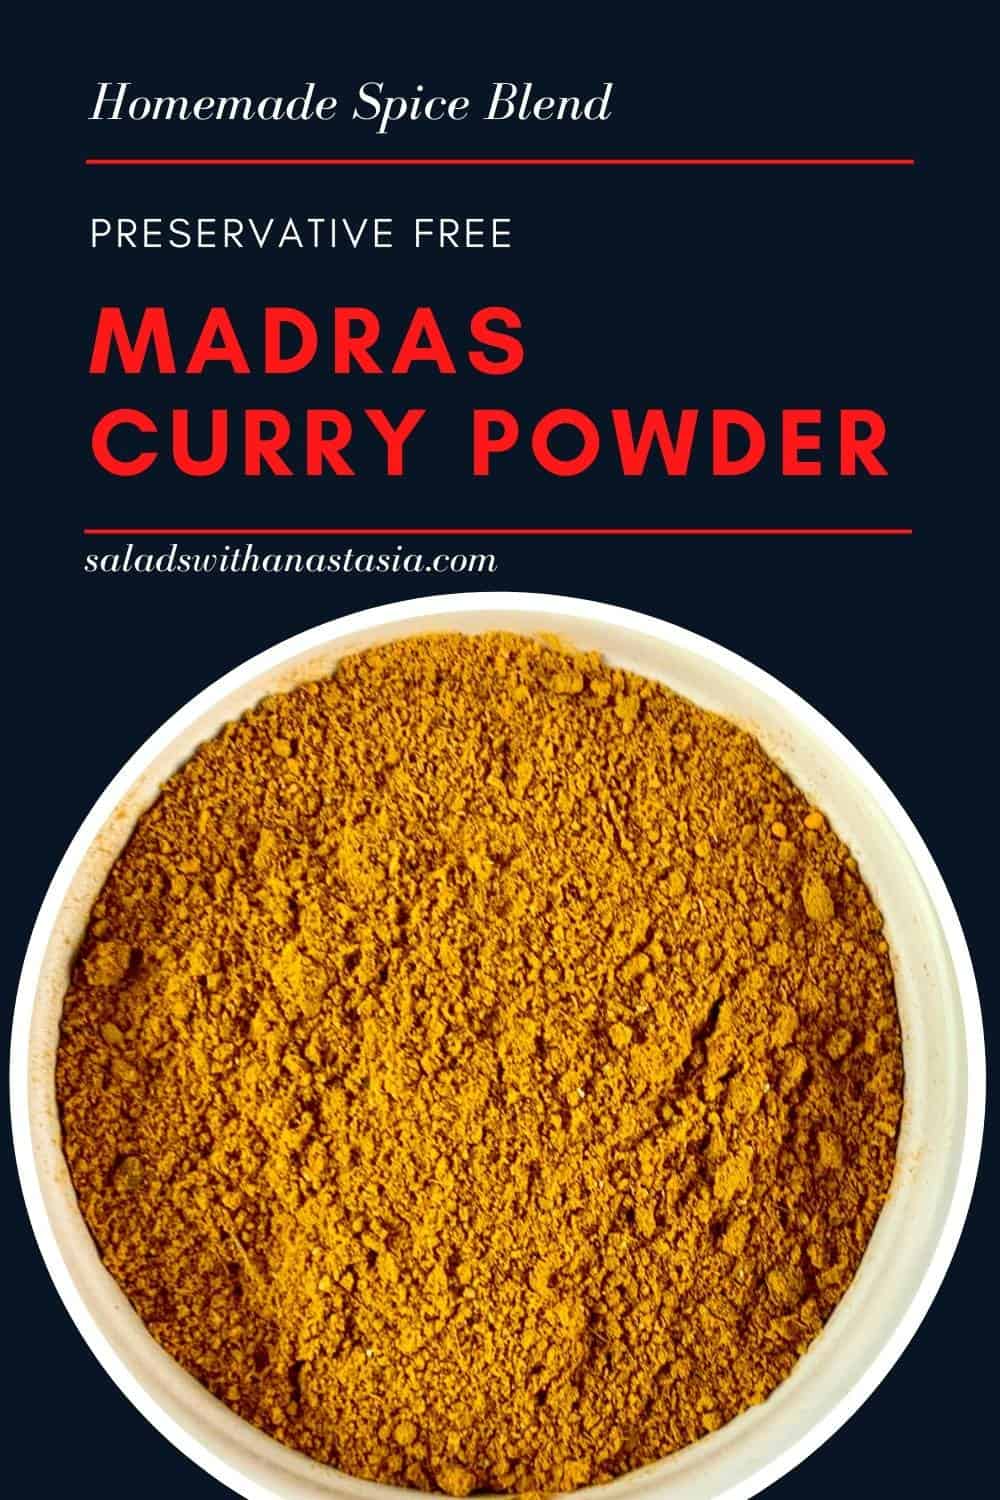 Madras Curry Powder in a white bowl with black background and text overlay.